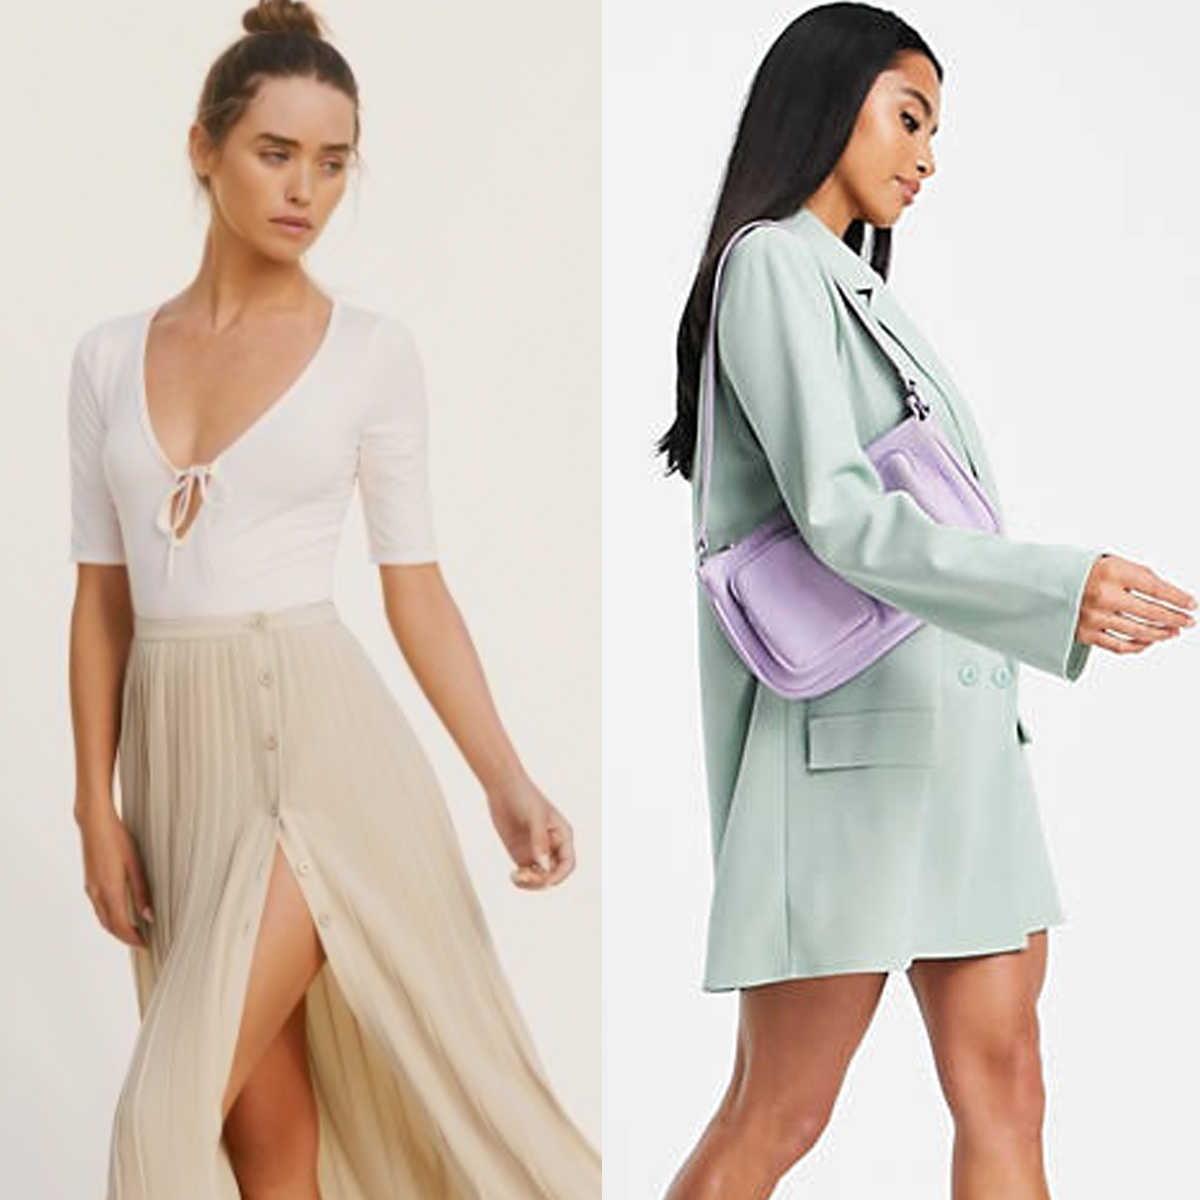 Petite Style Guide: The Brands E! Shopping Editors Swear By